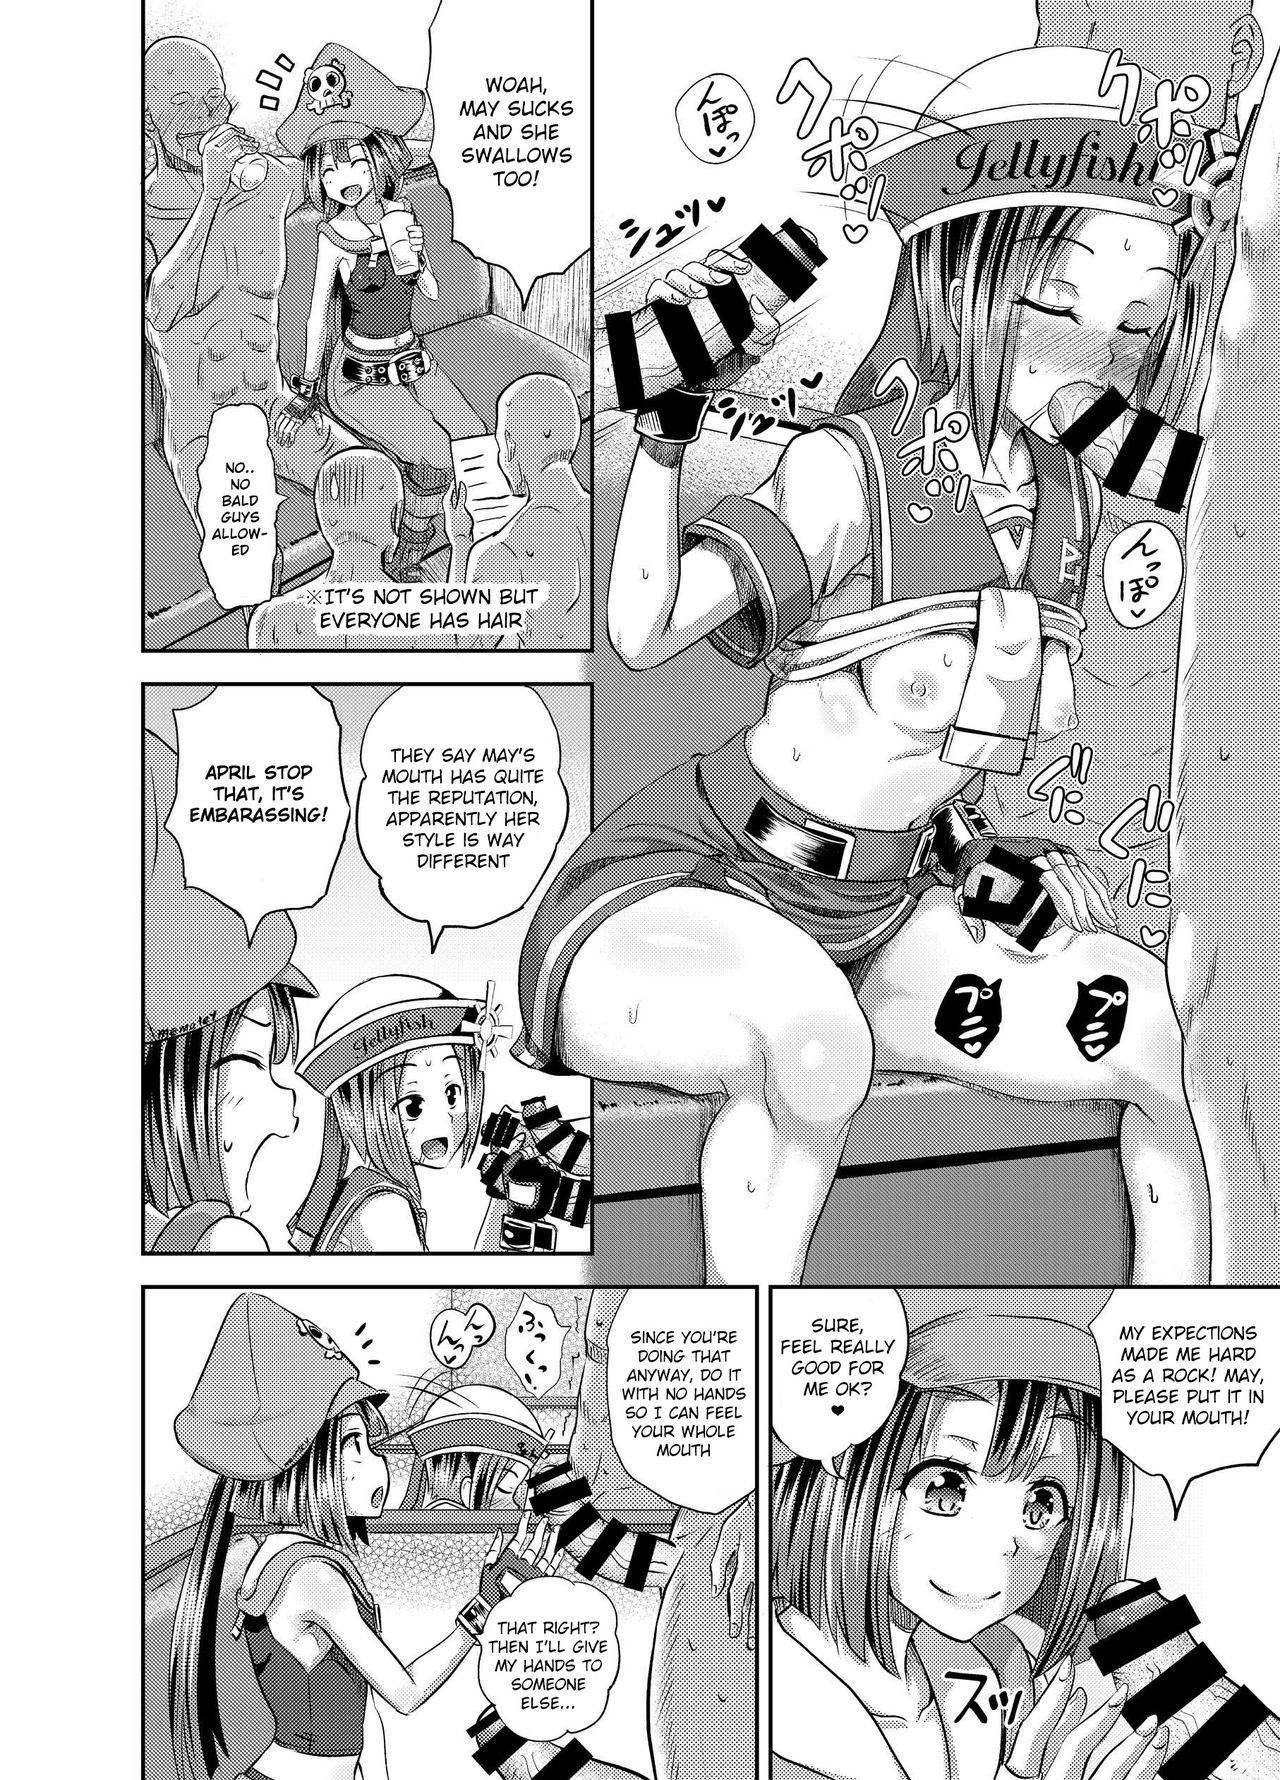 Adult Jellyfish Kaizokudan e Youkoso! | Welcome to The Jellyfish Pleasure Club! - Guilty gear Flashing - Page 5